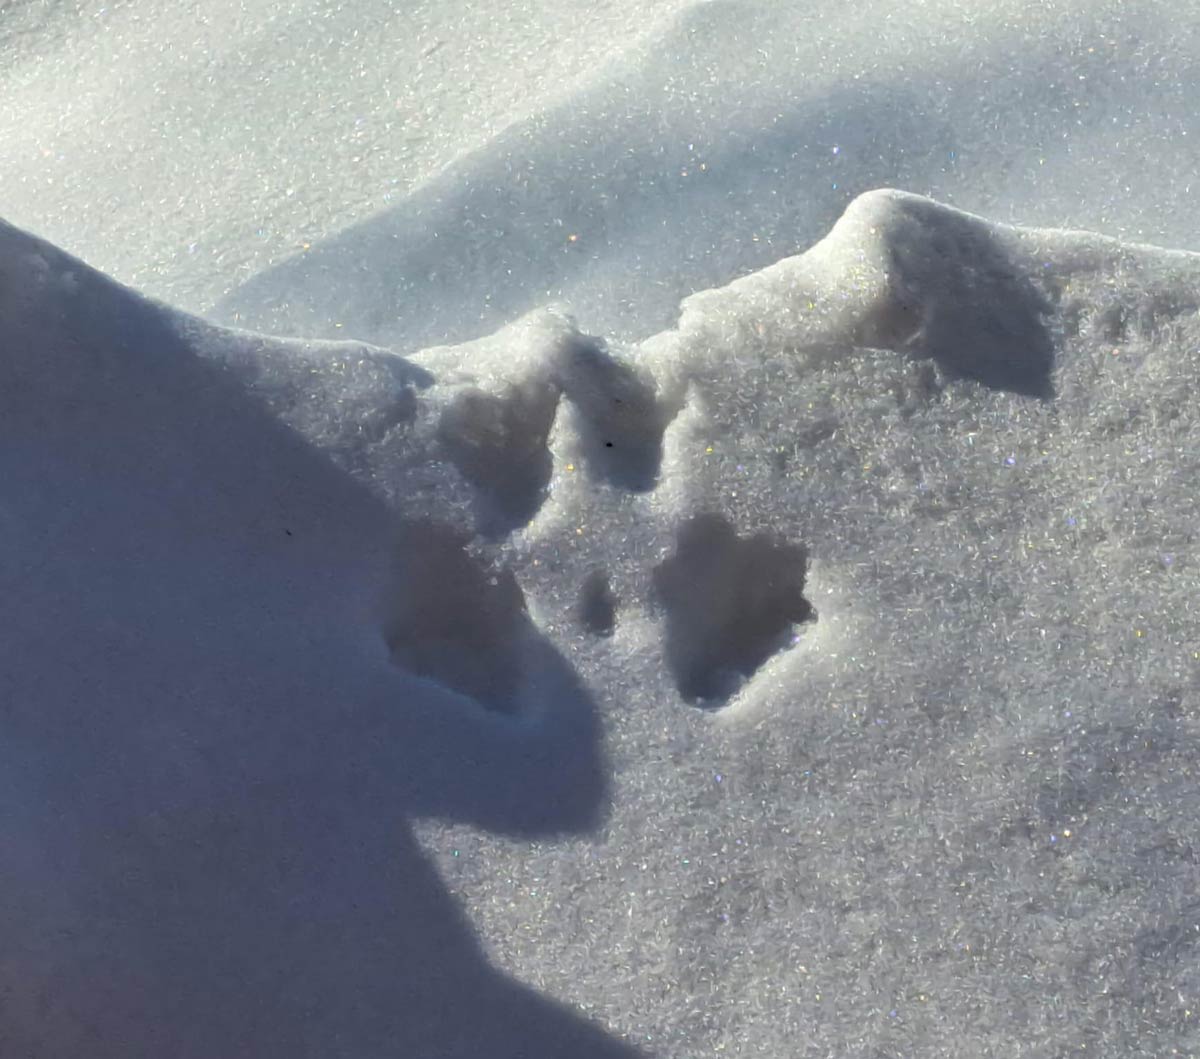 Tracks of a male squirrel